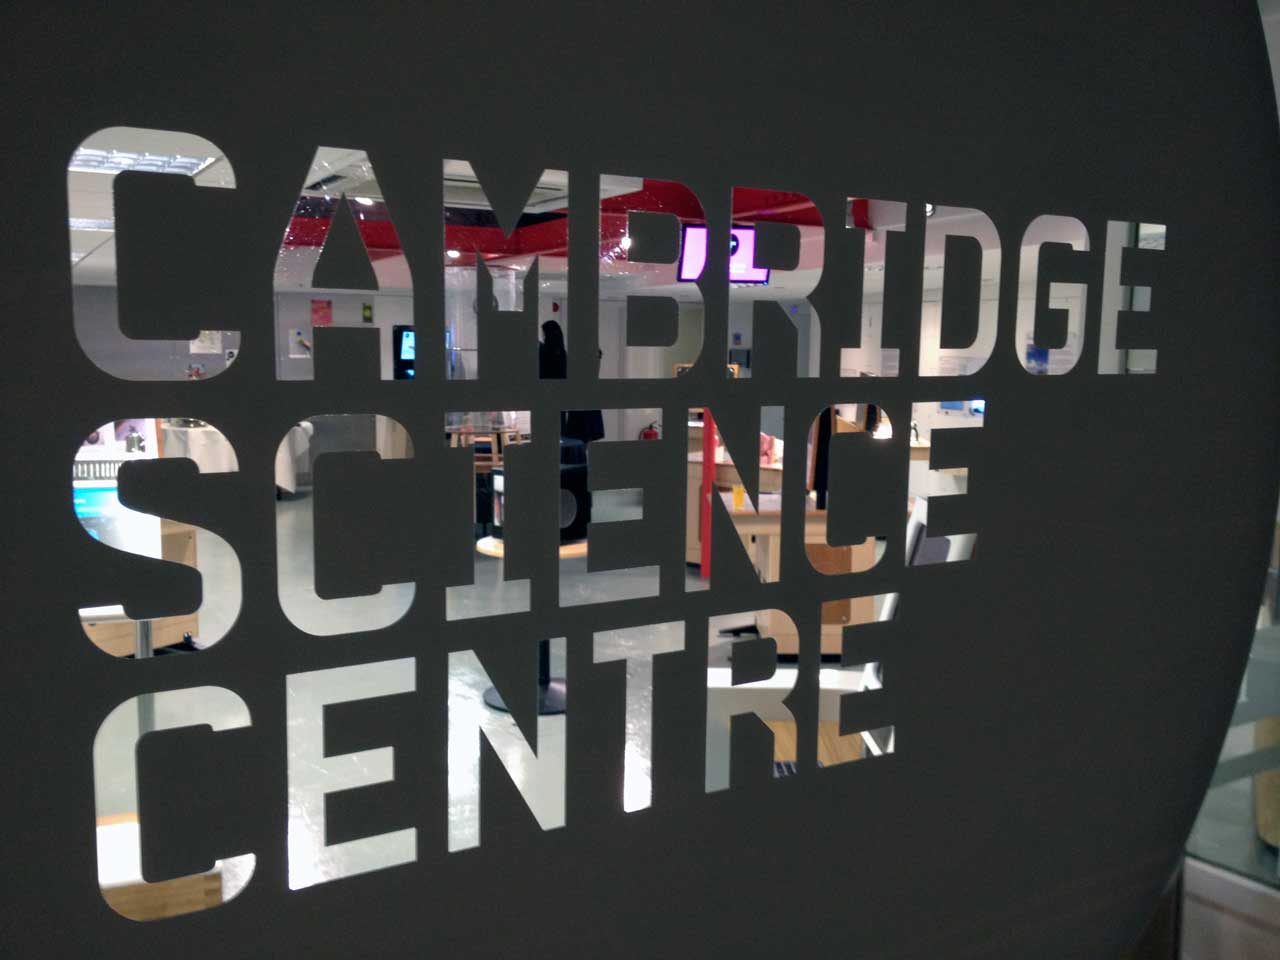 Calm before the storm: through the window of Cambridge Science Centre immediately before its opening party.